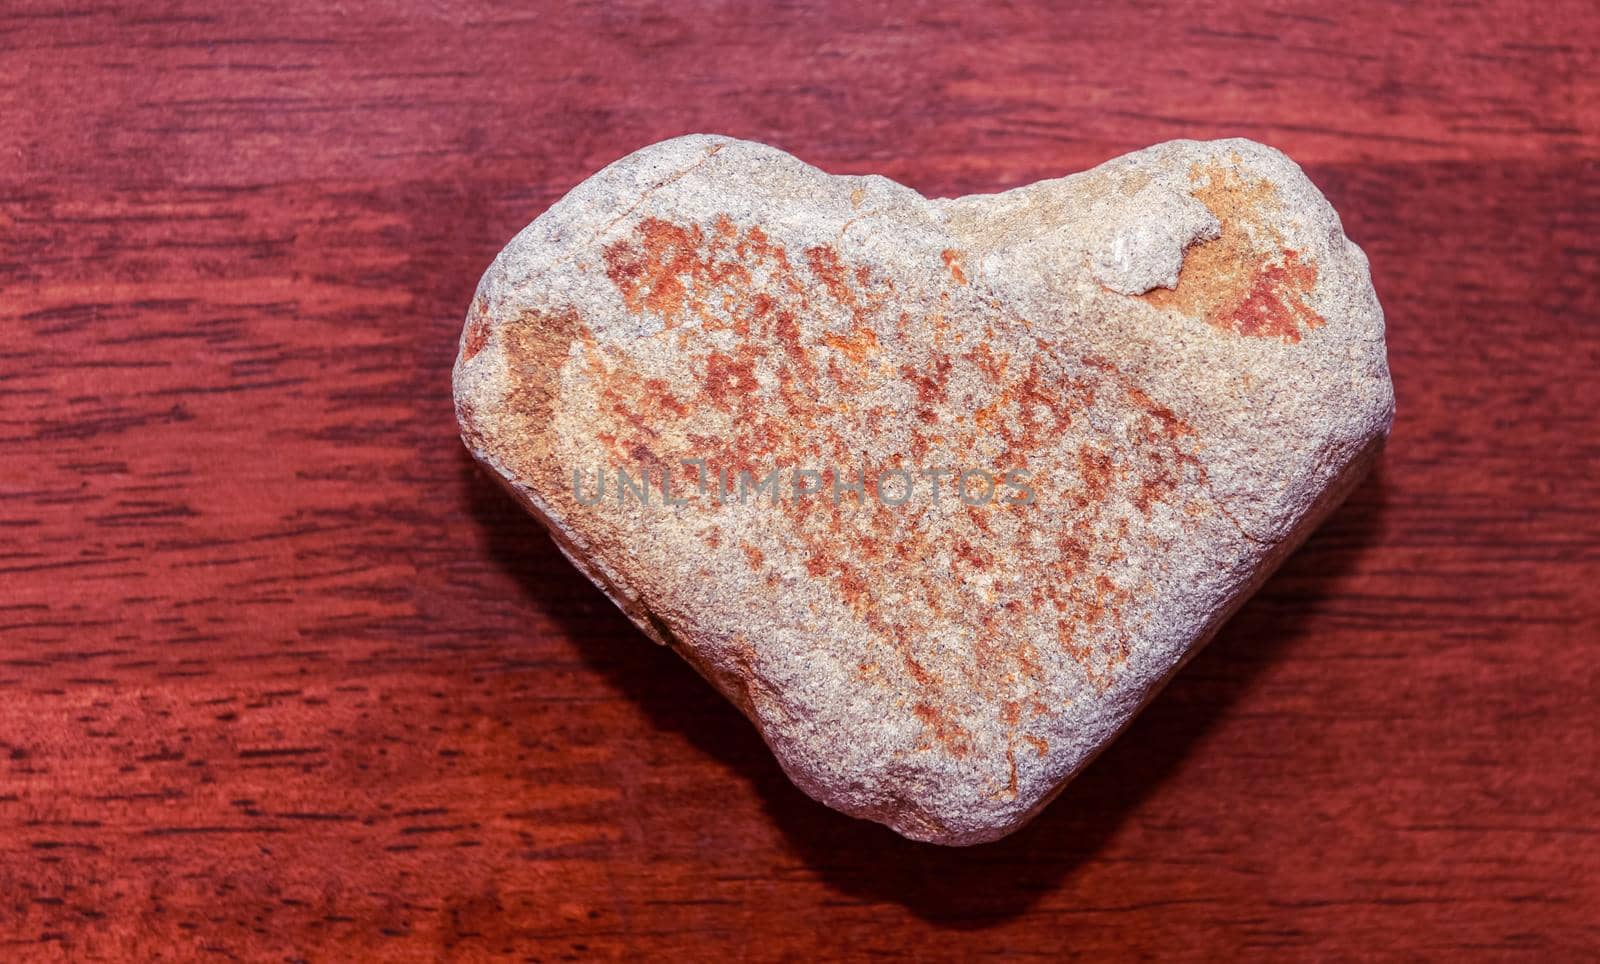 stone shaped like a heart on a wooden surface in red tone. Heart made of natural stone on a wooden background. Valentine's day and holiday concept by karpovkottt